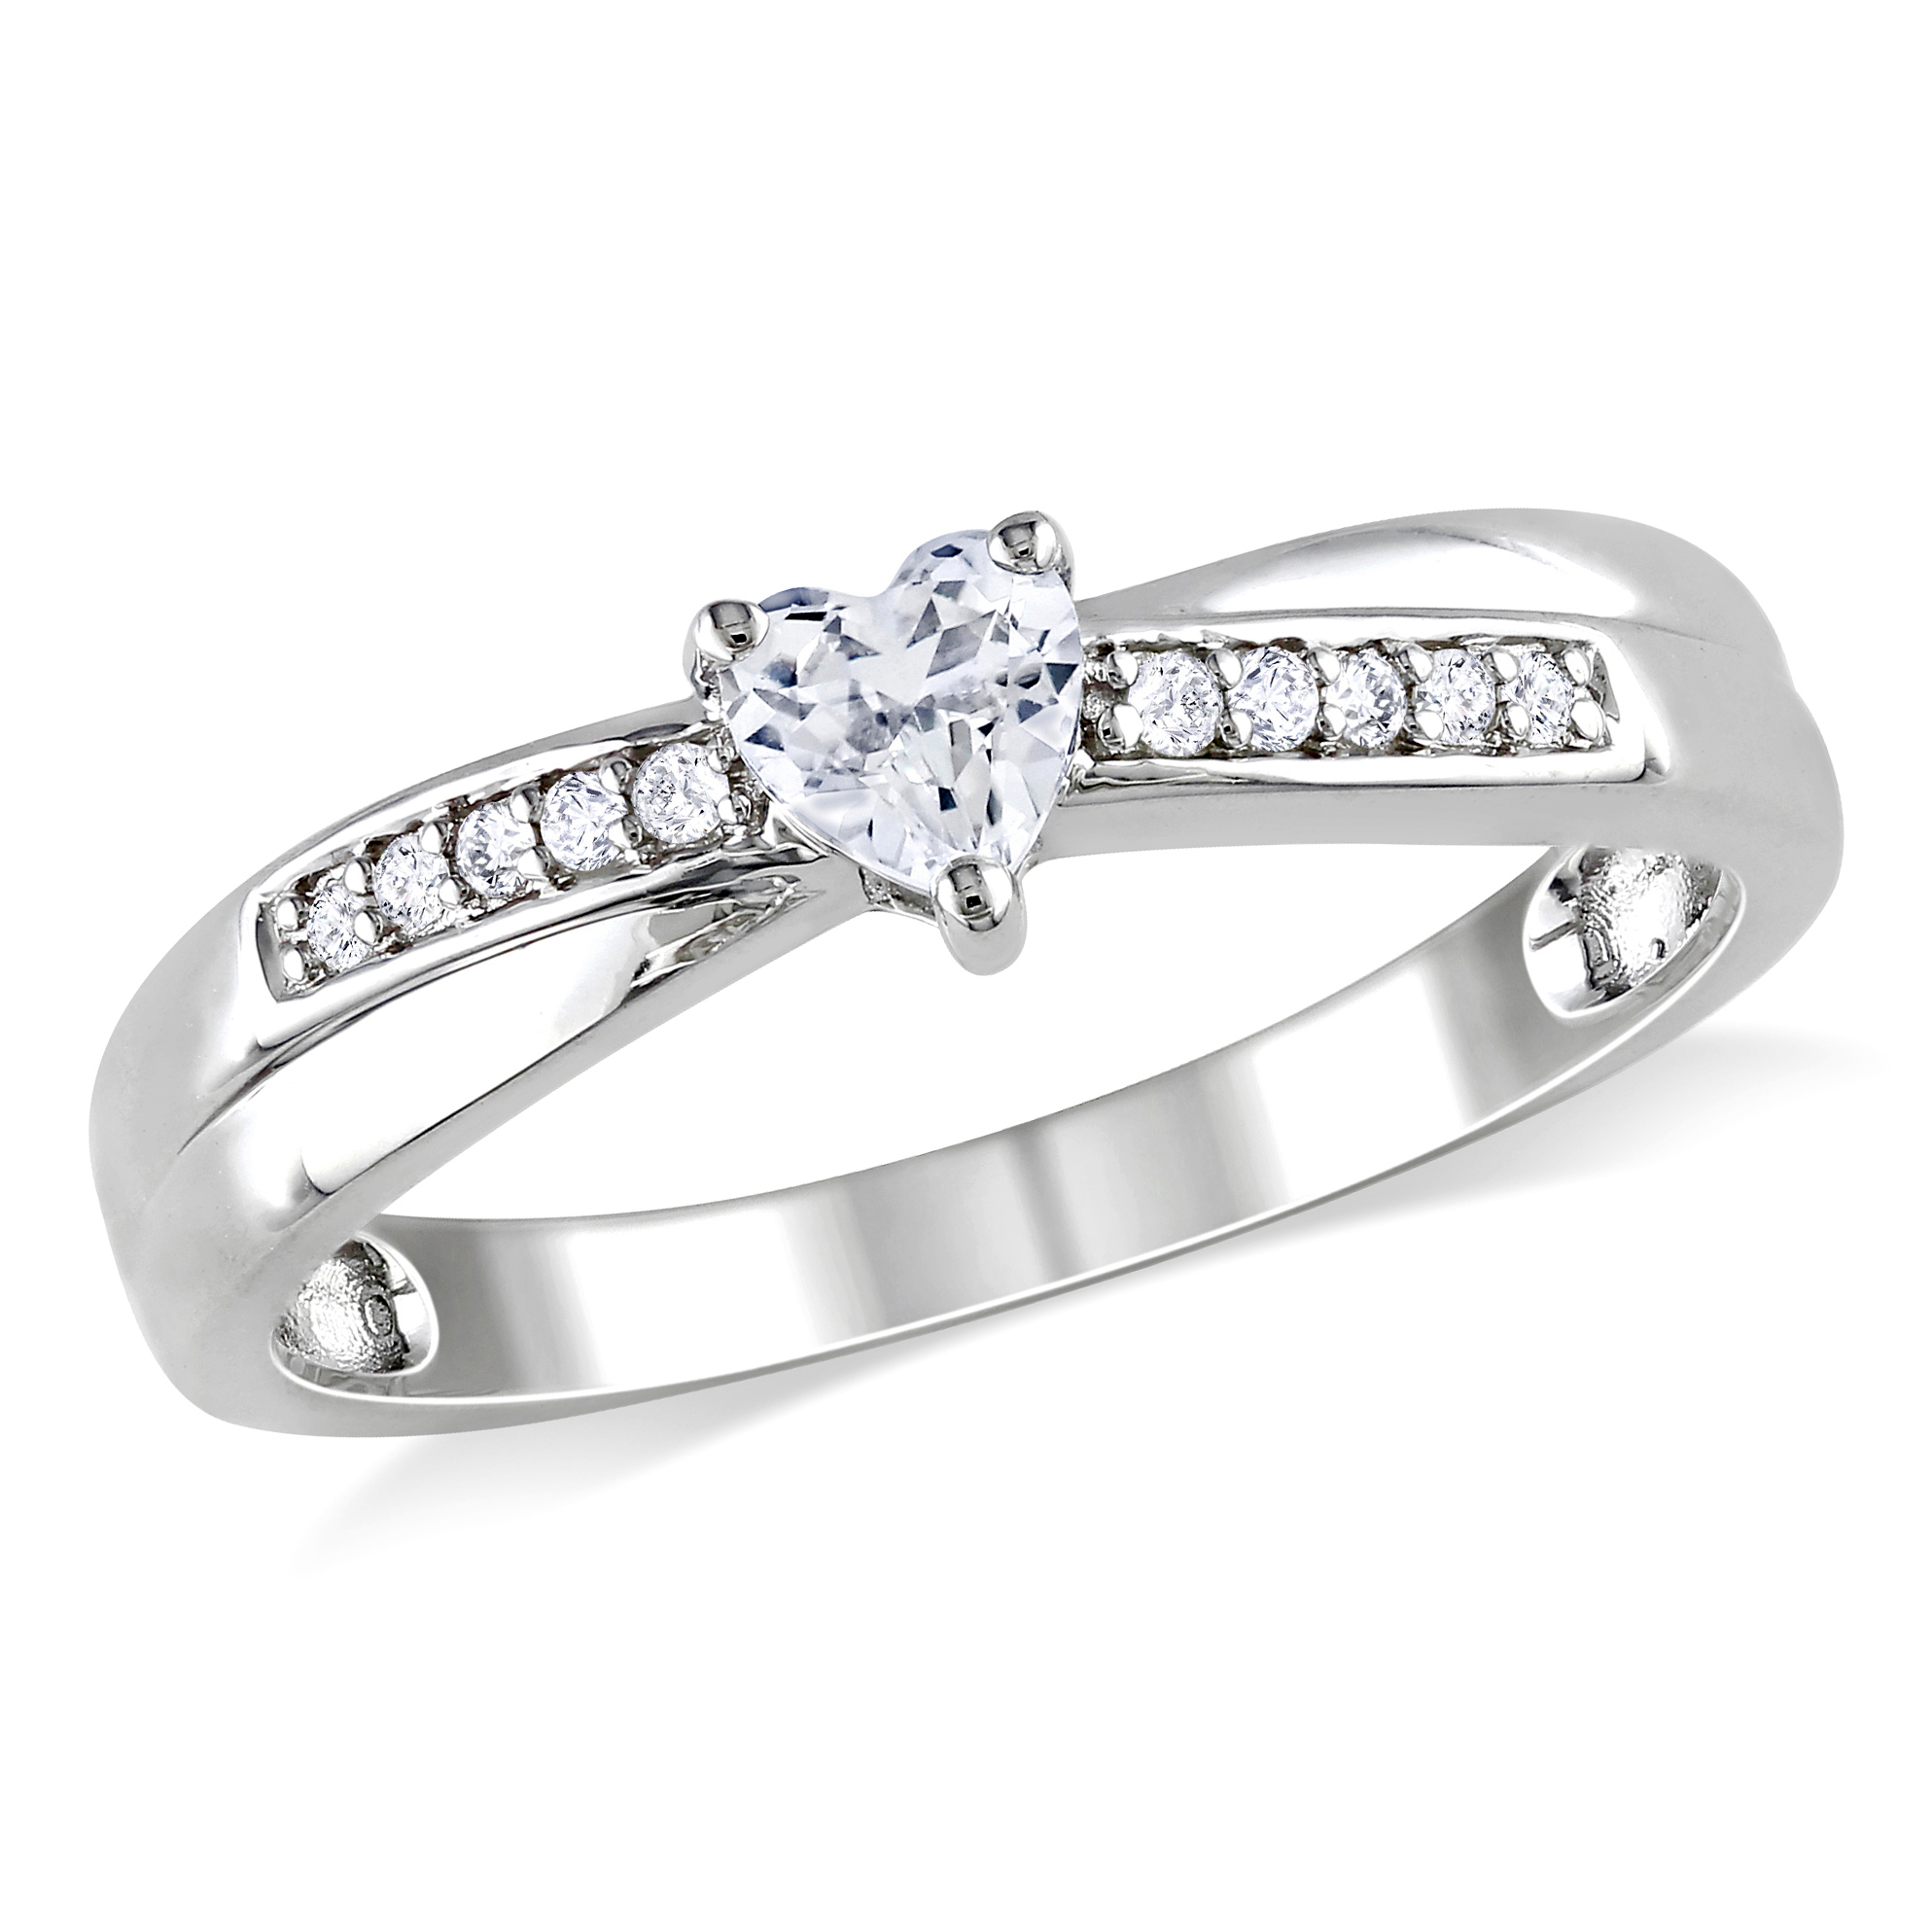 1/4 Carat T.G.W. Created White Sapphire and Diamond-Accent Engagement Ring in Sterling Silver